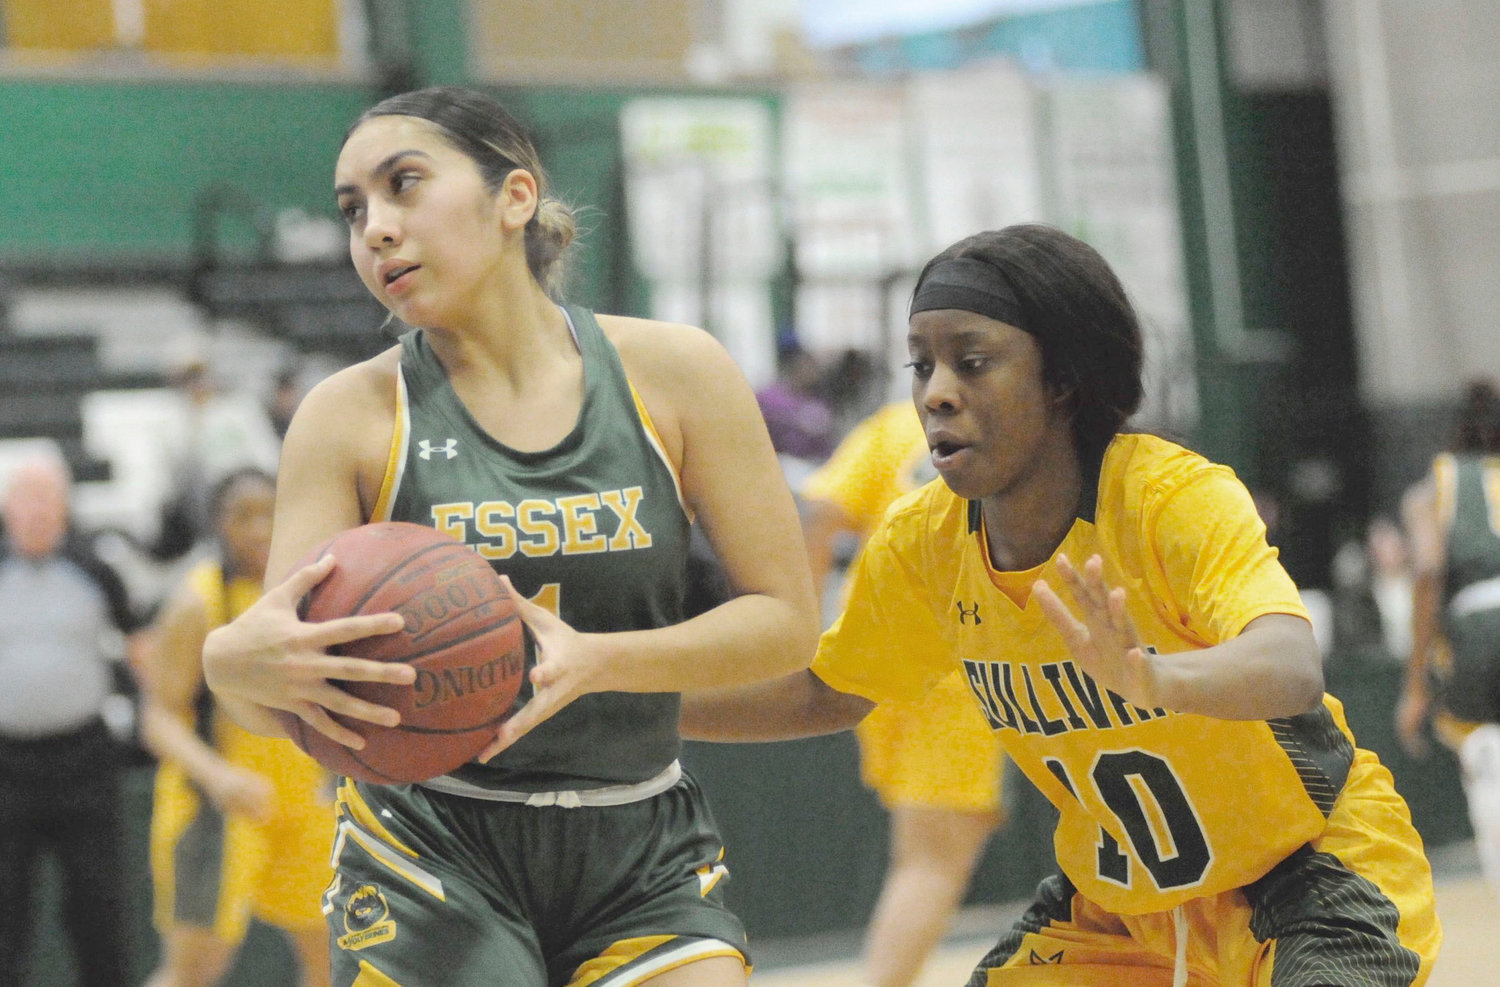 Looking for a steal. Ania Martinez of the Lady Wolverines has possession, while SUNY Sullivan’s freshman guard Aniyah Hector, a graduate of Thomas Jefferson High School in Brooklyn, has her eyes on the ball.